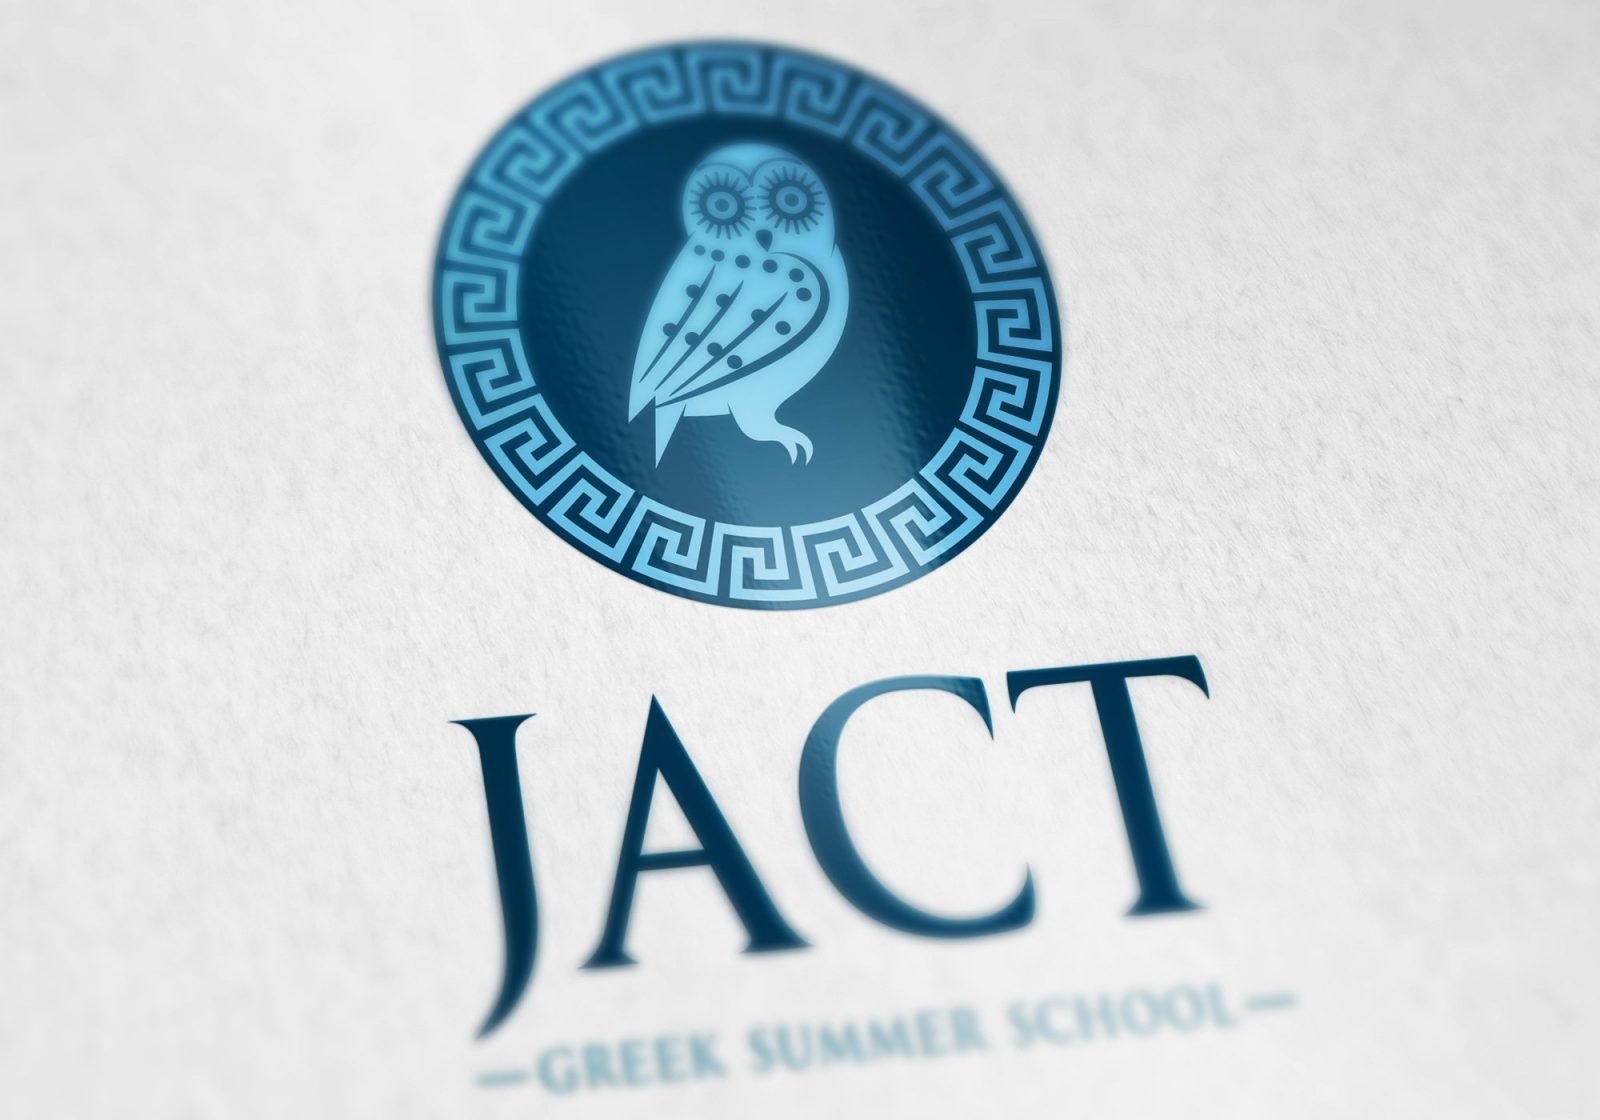 Close up of a logo on paper for JACK Greek Summer School